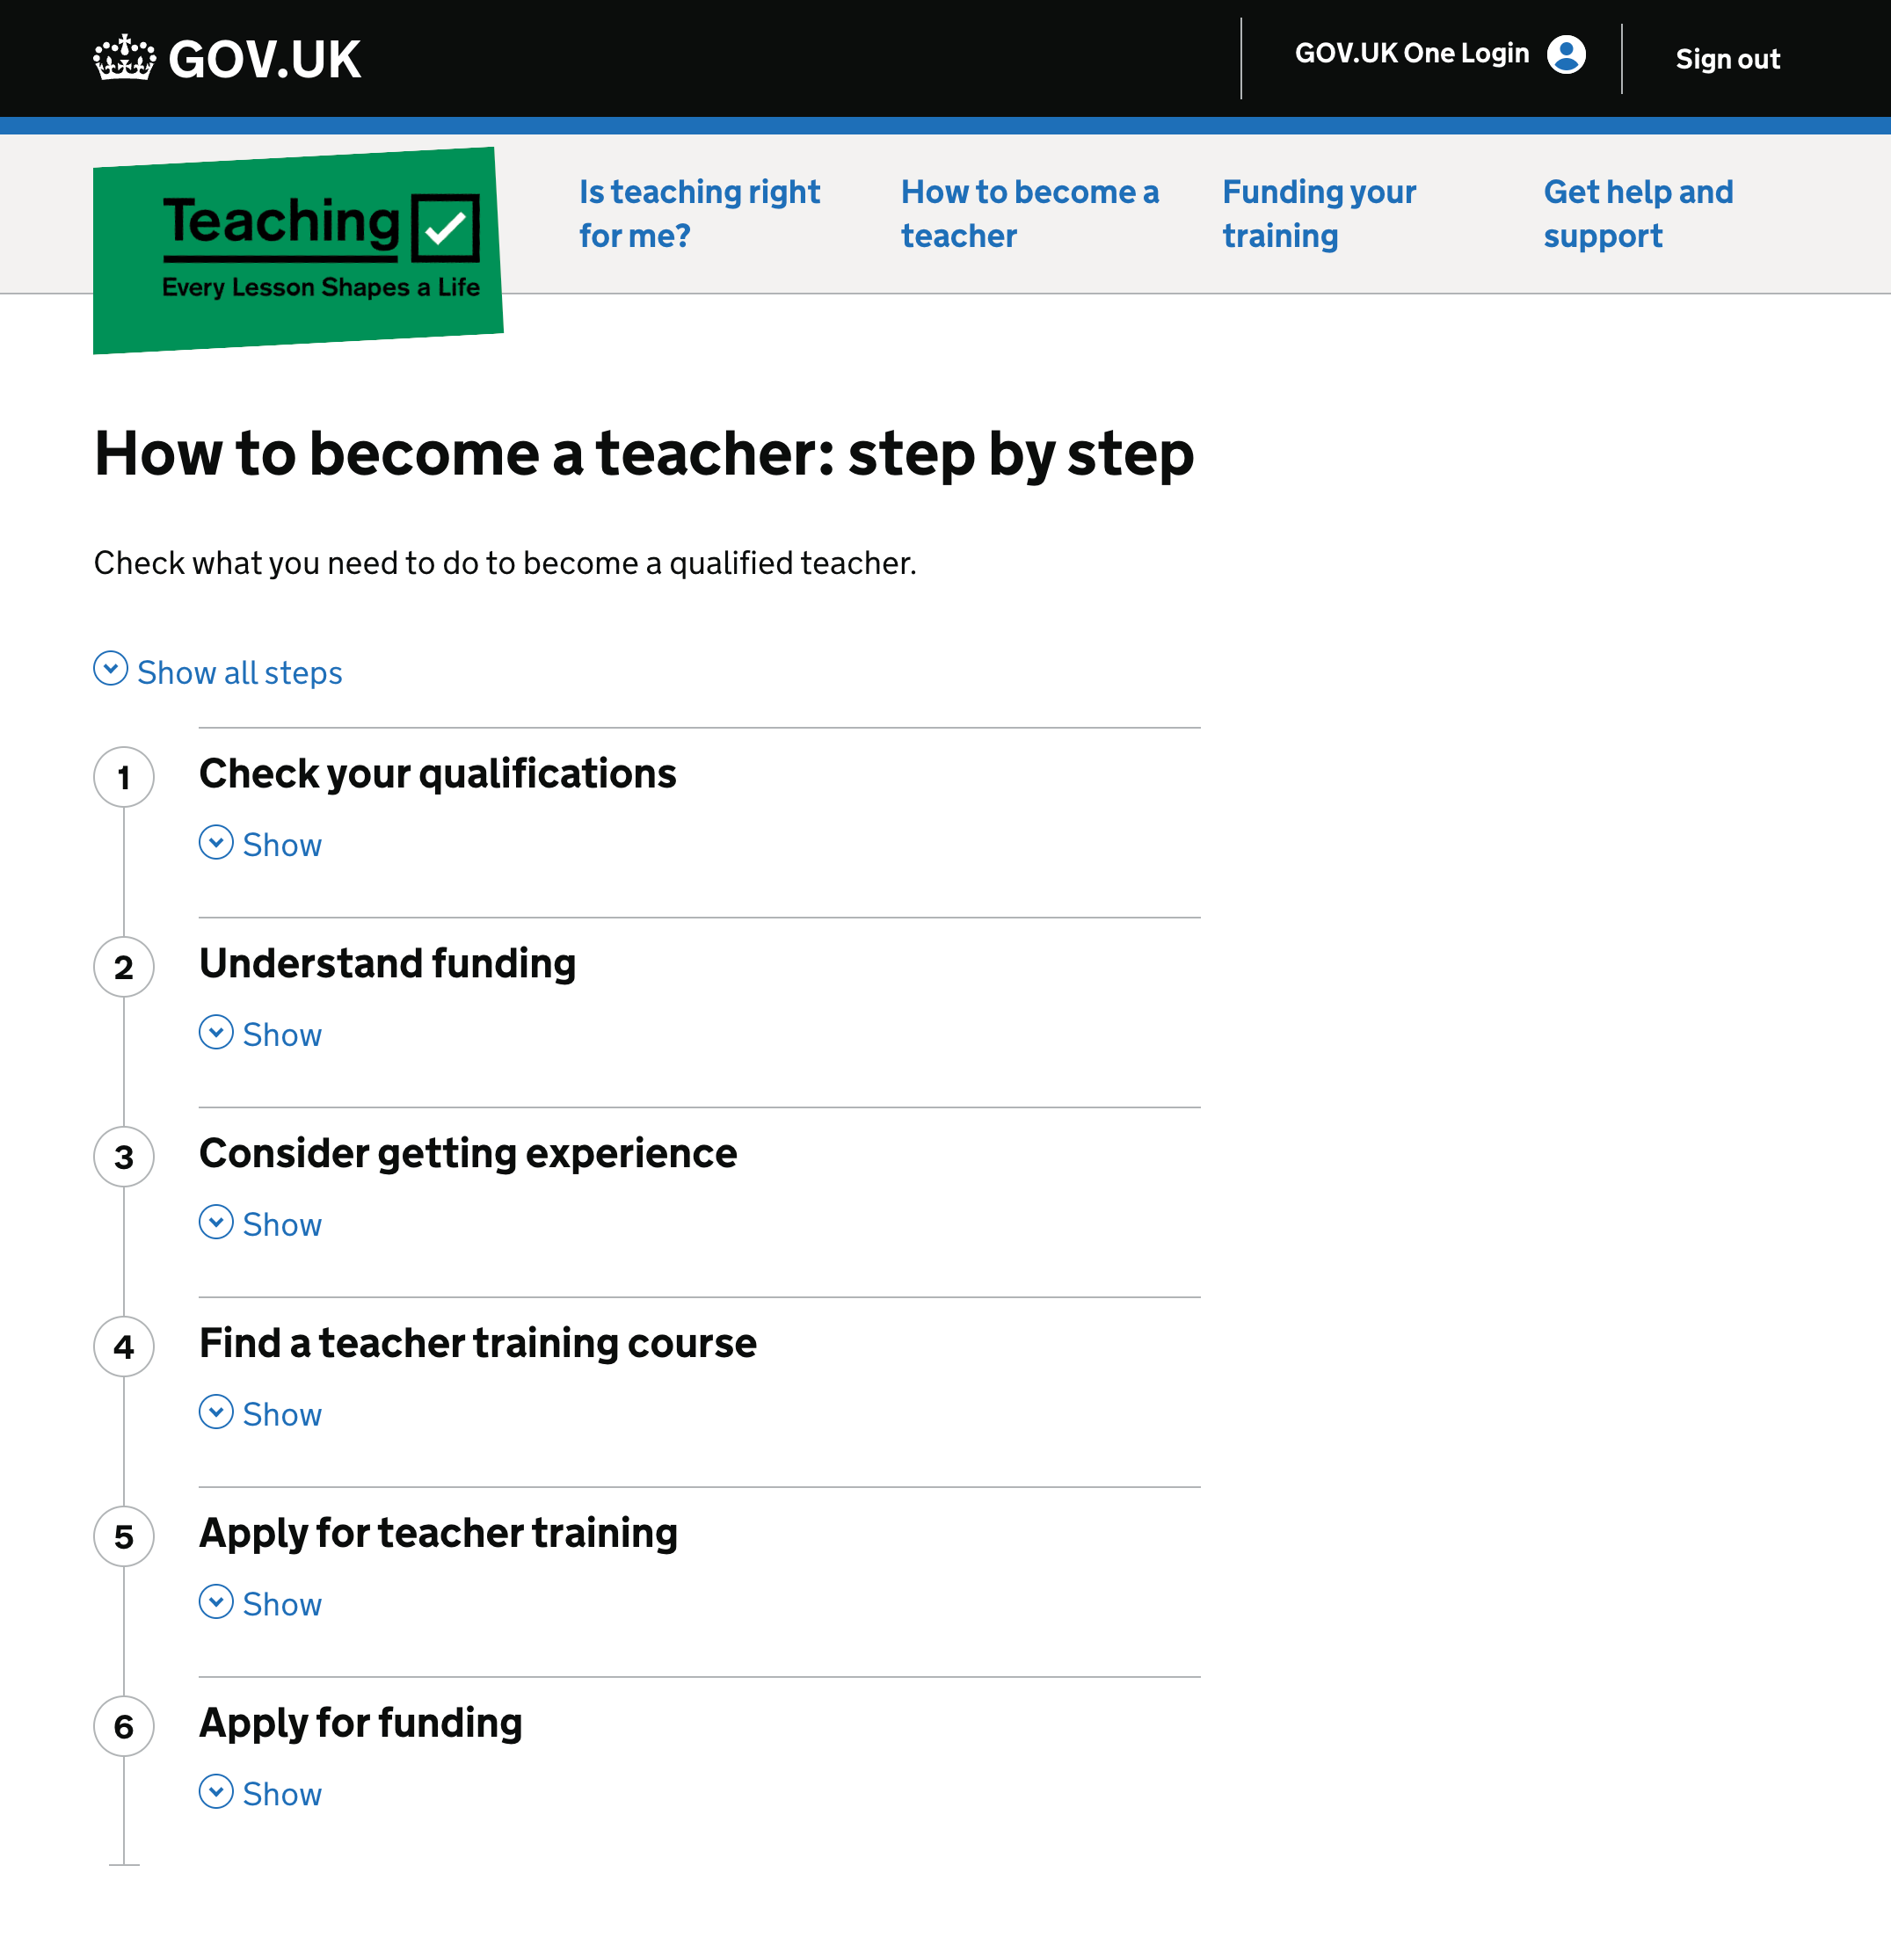 Screenshot showing a page with the title 'How to become a teacher: step by step' with 6 steps.